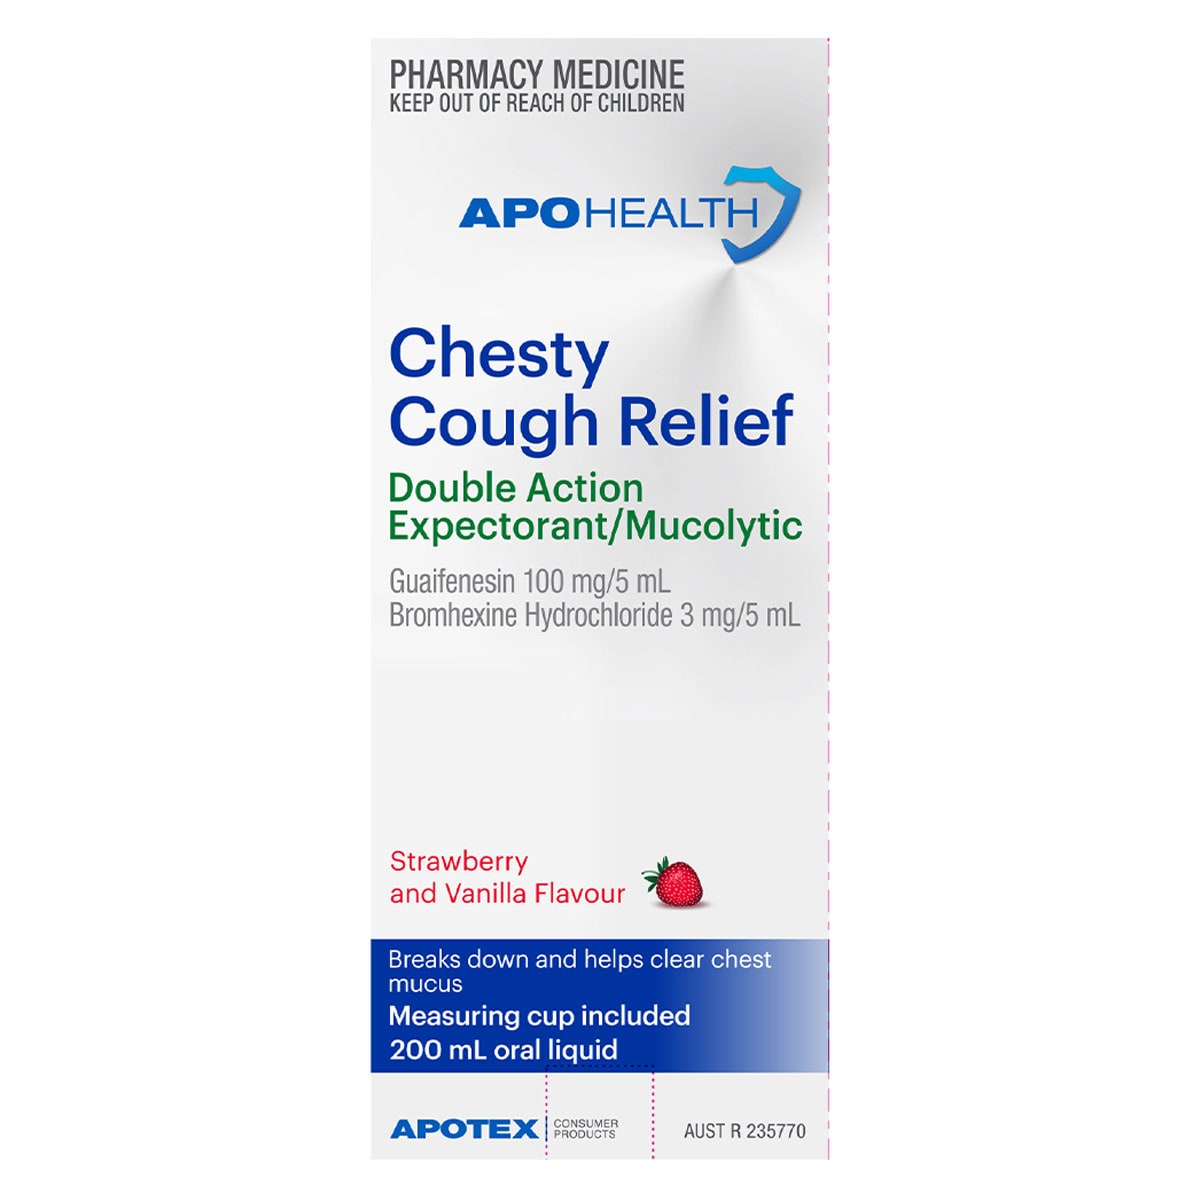 APOHEALTH Chesty Cough Relief Double Action Expectorant/Mucolytic 200ml